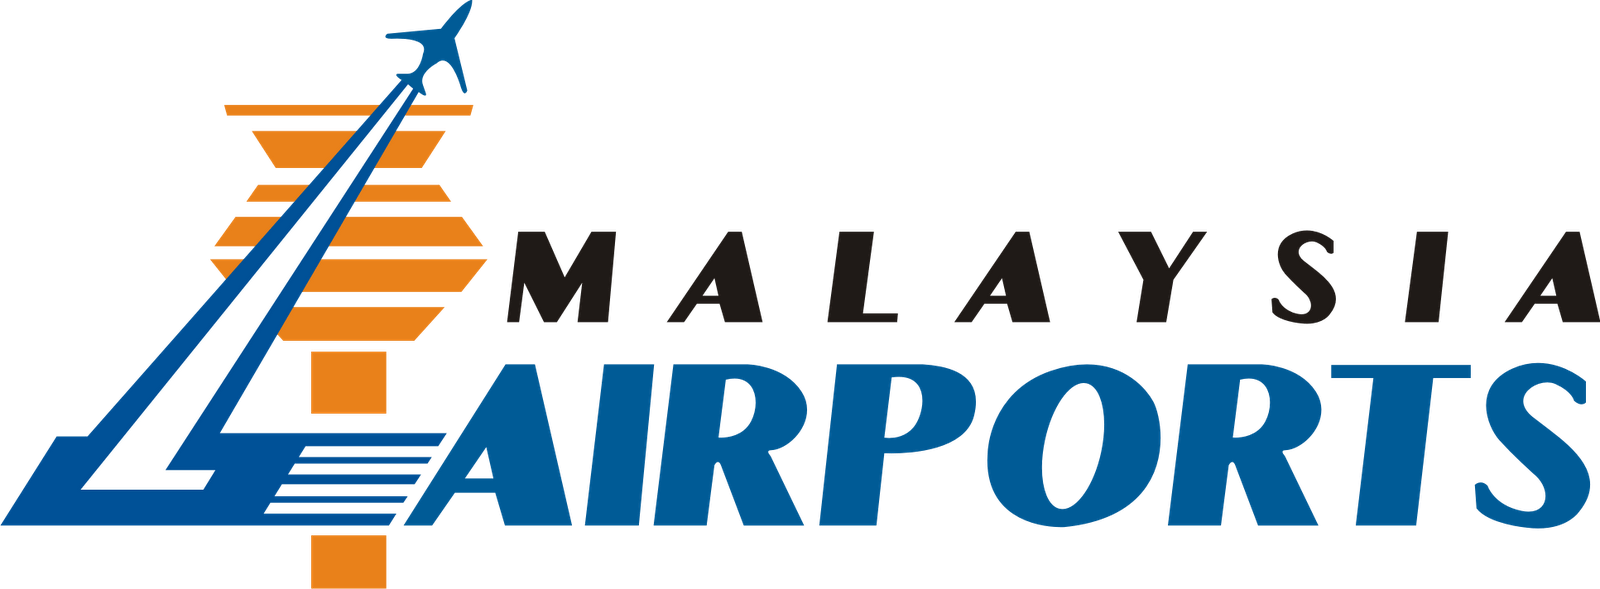 Airports Logo - Malaysia Airports Competitors, Revenue and Employees - Owler Company ...